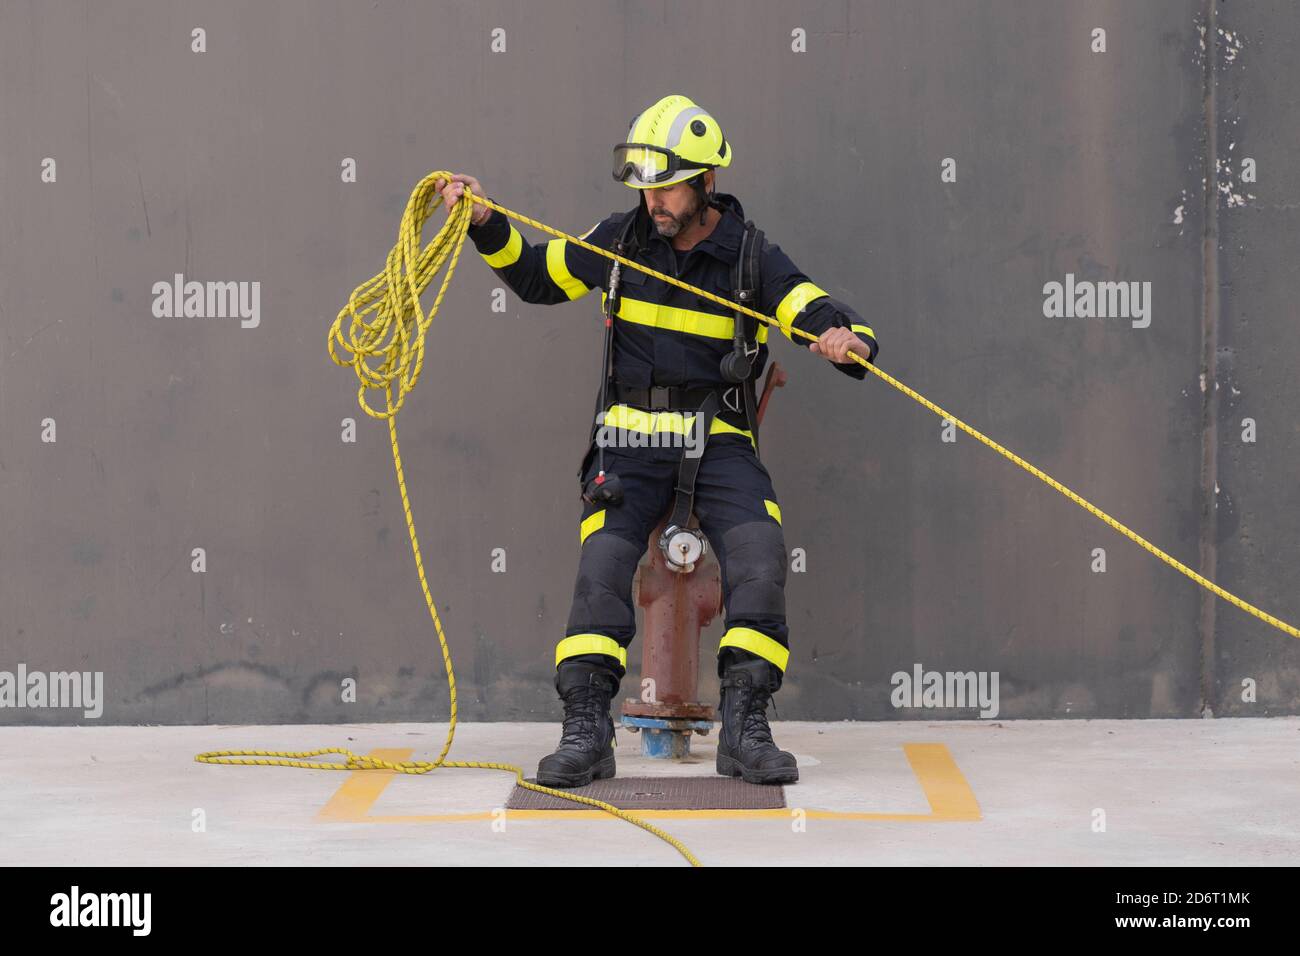 Bearded firefighter in protective hardhat and bright uniform standing on cement floor with rope during routine practices at work Stock Photo